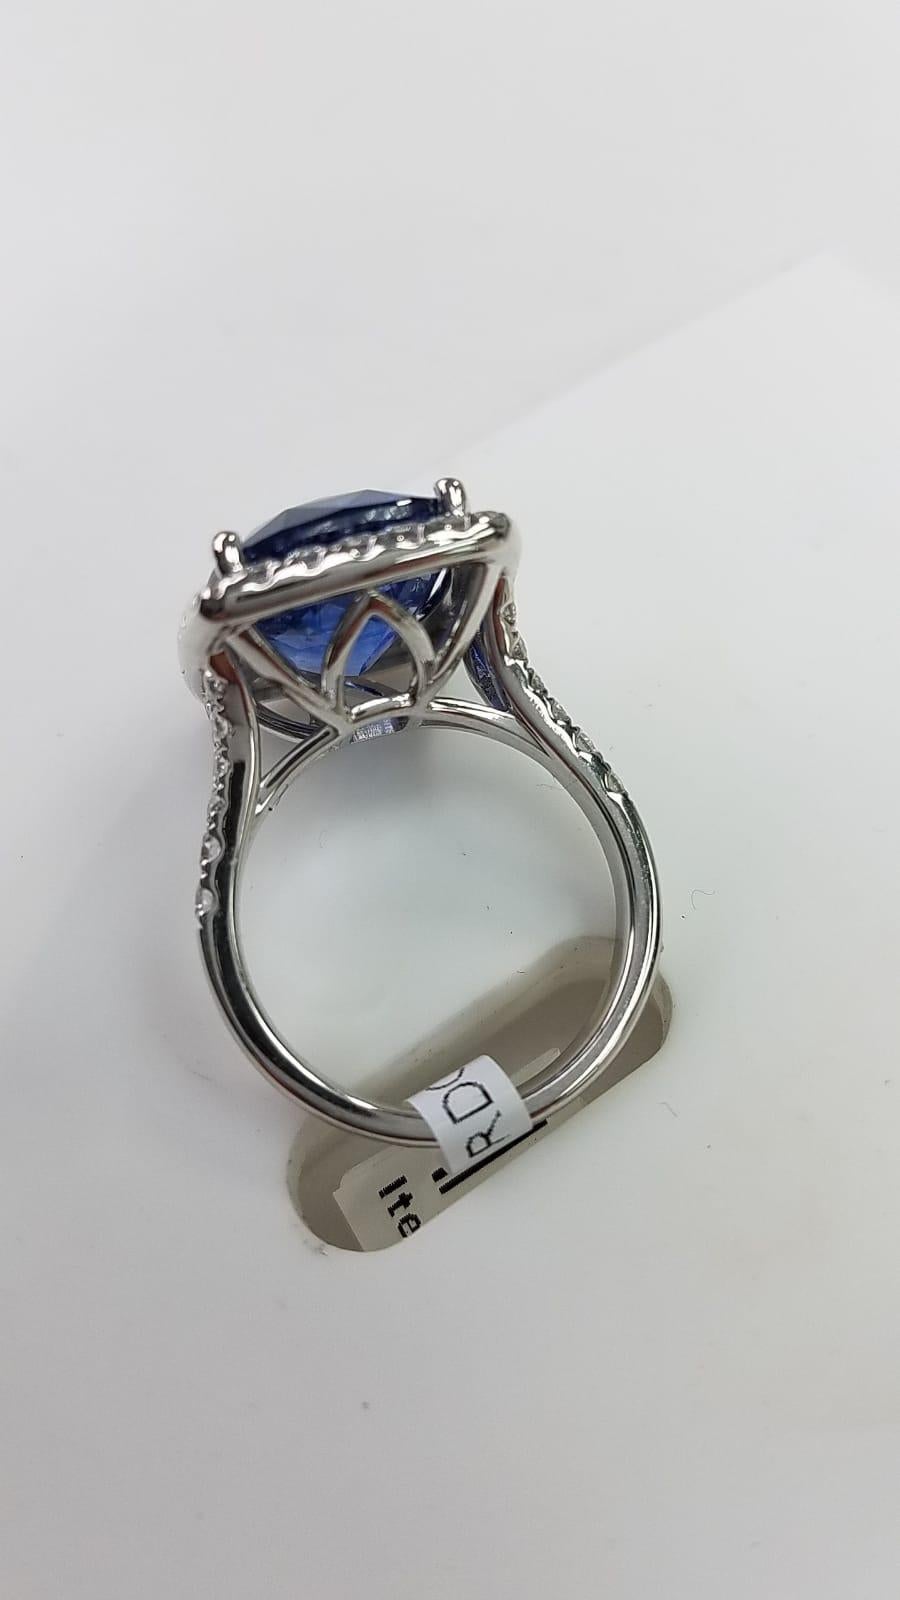 Platinum Cushion Cut 11.06 Carat Blue Sapphire & Diamond Ring #17408(GIA CERT.) In New Condition For Sale In Great Neck, NY